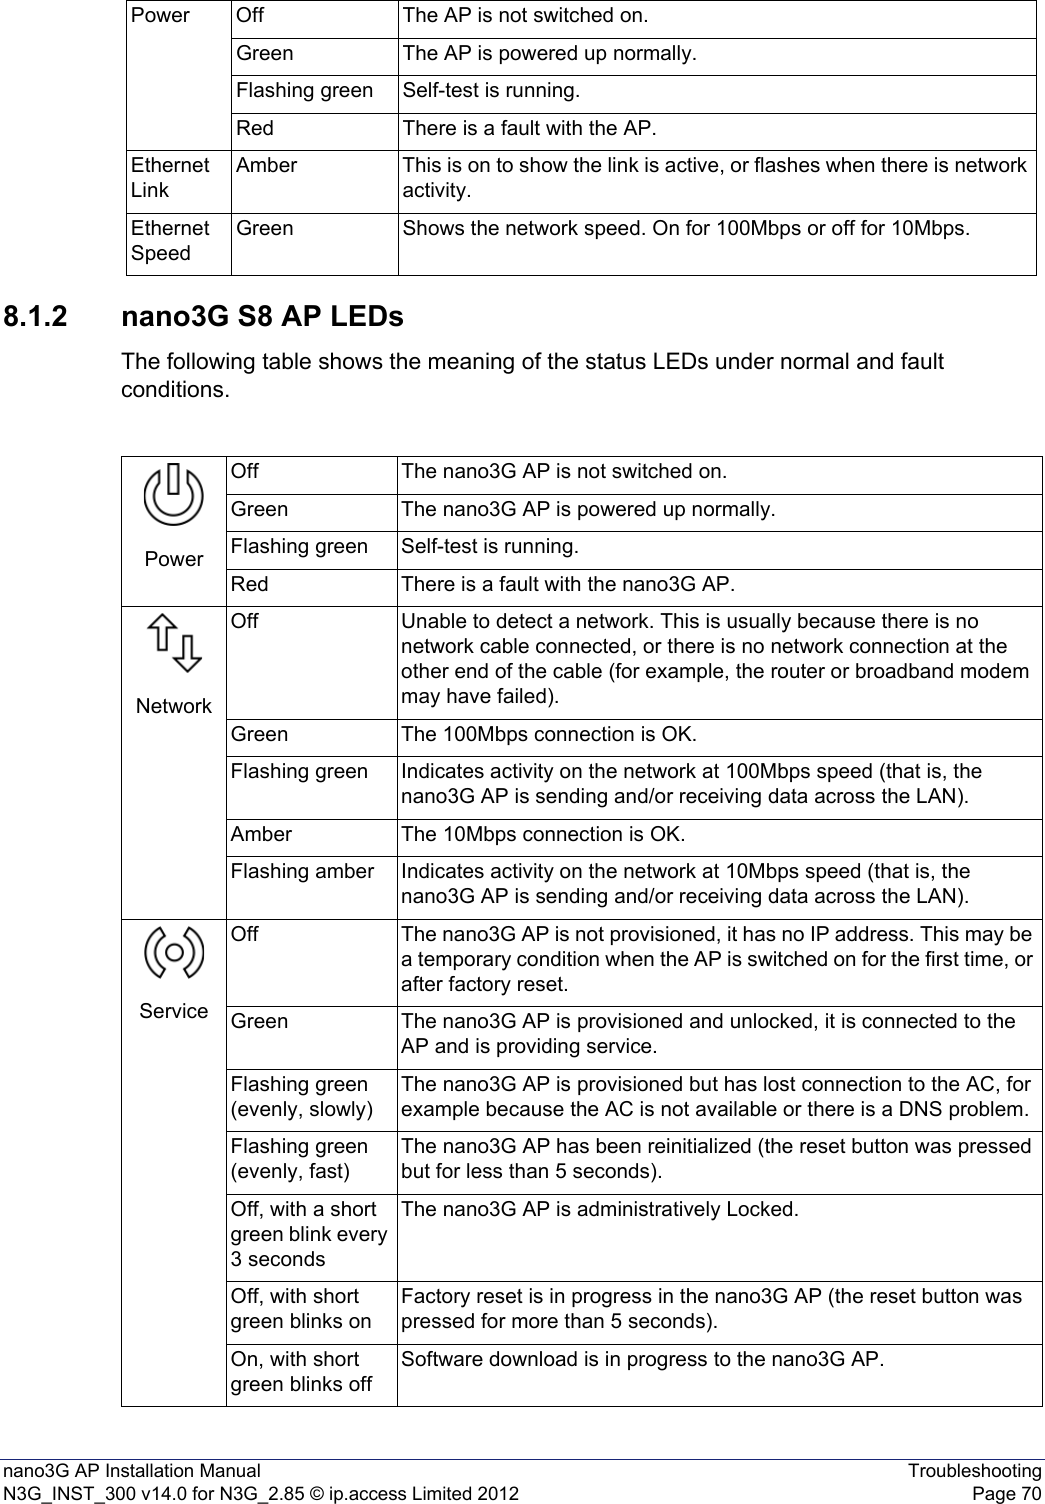 nano3G AP Installation Manual TroubleshootingN3G_INST_300 v14.0 for N3G_2.85 © ip.access Limited 2012 Page 708.1.2 nano3G S8 AP LEDsThe following table shows the meaning of the status LEDs under normal and fault conditions.Power Off The AP is not switched on.Green The AP is powered up normally.Flashing green Self-test is running.Red There is a fault with the AP.Ethernet LinkAmber This is on to show the link is active, or flashes when there is network activity. Ethernet SpeedGreen Shows the network speed. On for 100Mbps or off for 10Mbps. PowerOff The nano3G AP is not switched on.Green The nano3G AP is powered up normally.Flashing green Self-test is running.Red There is a fault with the nano3G AP.NetworkOff Unable to detect a network. This is usually because there is no network cable connected, or there is no network connection at the other end of the cable (for example, the router or broadband modem may have failed).Green The 100Mbps connection is OK.Flashing green Indicates activity on the network at 100Mbps speed (that is, the nano3G AP is sending and/or receiving data across the LAN).Amber The 10Mbps connection is OK.Flashing amber Indicates activity on the network at 10Mbps speed (that is, the nano3G AP is sending and/or receiving data across the LAN).ServiceOff The nano3G AP is not provisioned, it has no IP address. This may be a temporary condition when the AP is switched on for the first time, or after factory reset.Green The nano3G AP is provisioned and unlocked, it is connected to the AP and is providing service.Flashing green (evenly, slowly)The nano3G AP is provisioned but has lost connection to the AC, for example because the AC is not available or there is a DNS problem.Flashing green (evenly, fast)The nano3G AP has been reinitialized (the reset button was pressed but for less than 5 seconds).Off, with a short green blink every 3 secondsThe nano3G AP is administratively Locked. Off, with short green blinks onFactory reset is in progress in the nano3G AP (the reset button was pressed for more than 5 seconds).On, with short green blinks offSoftware download is in progress to the nano3G AP.